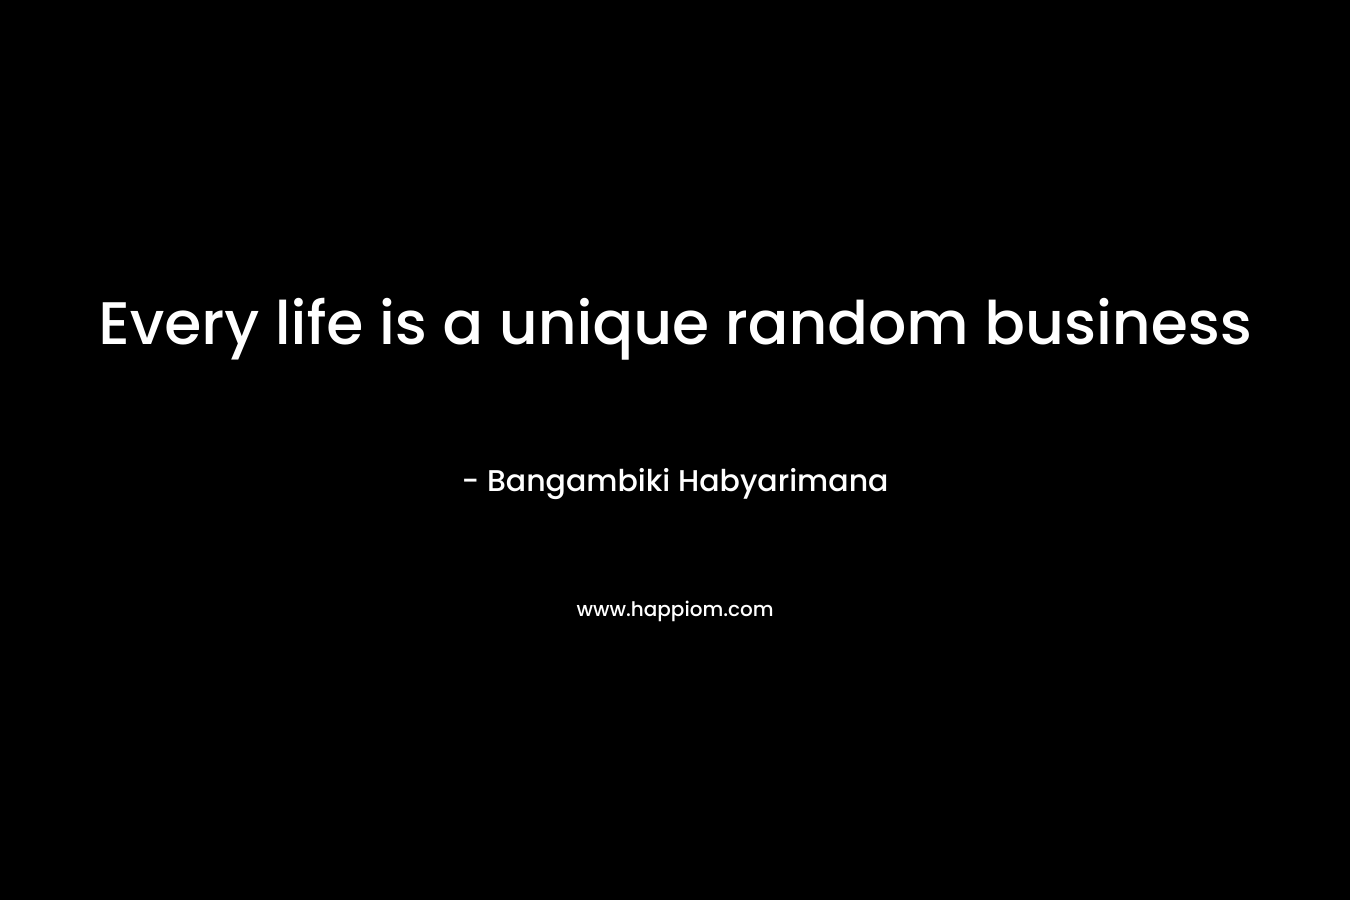 Every life is a unique random business